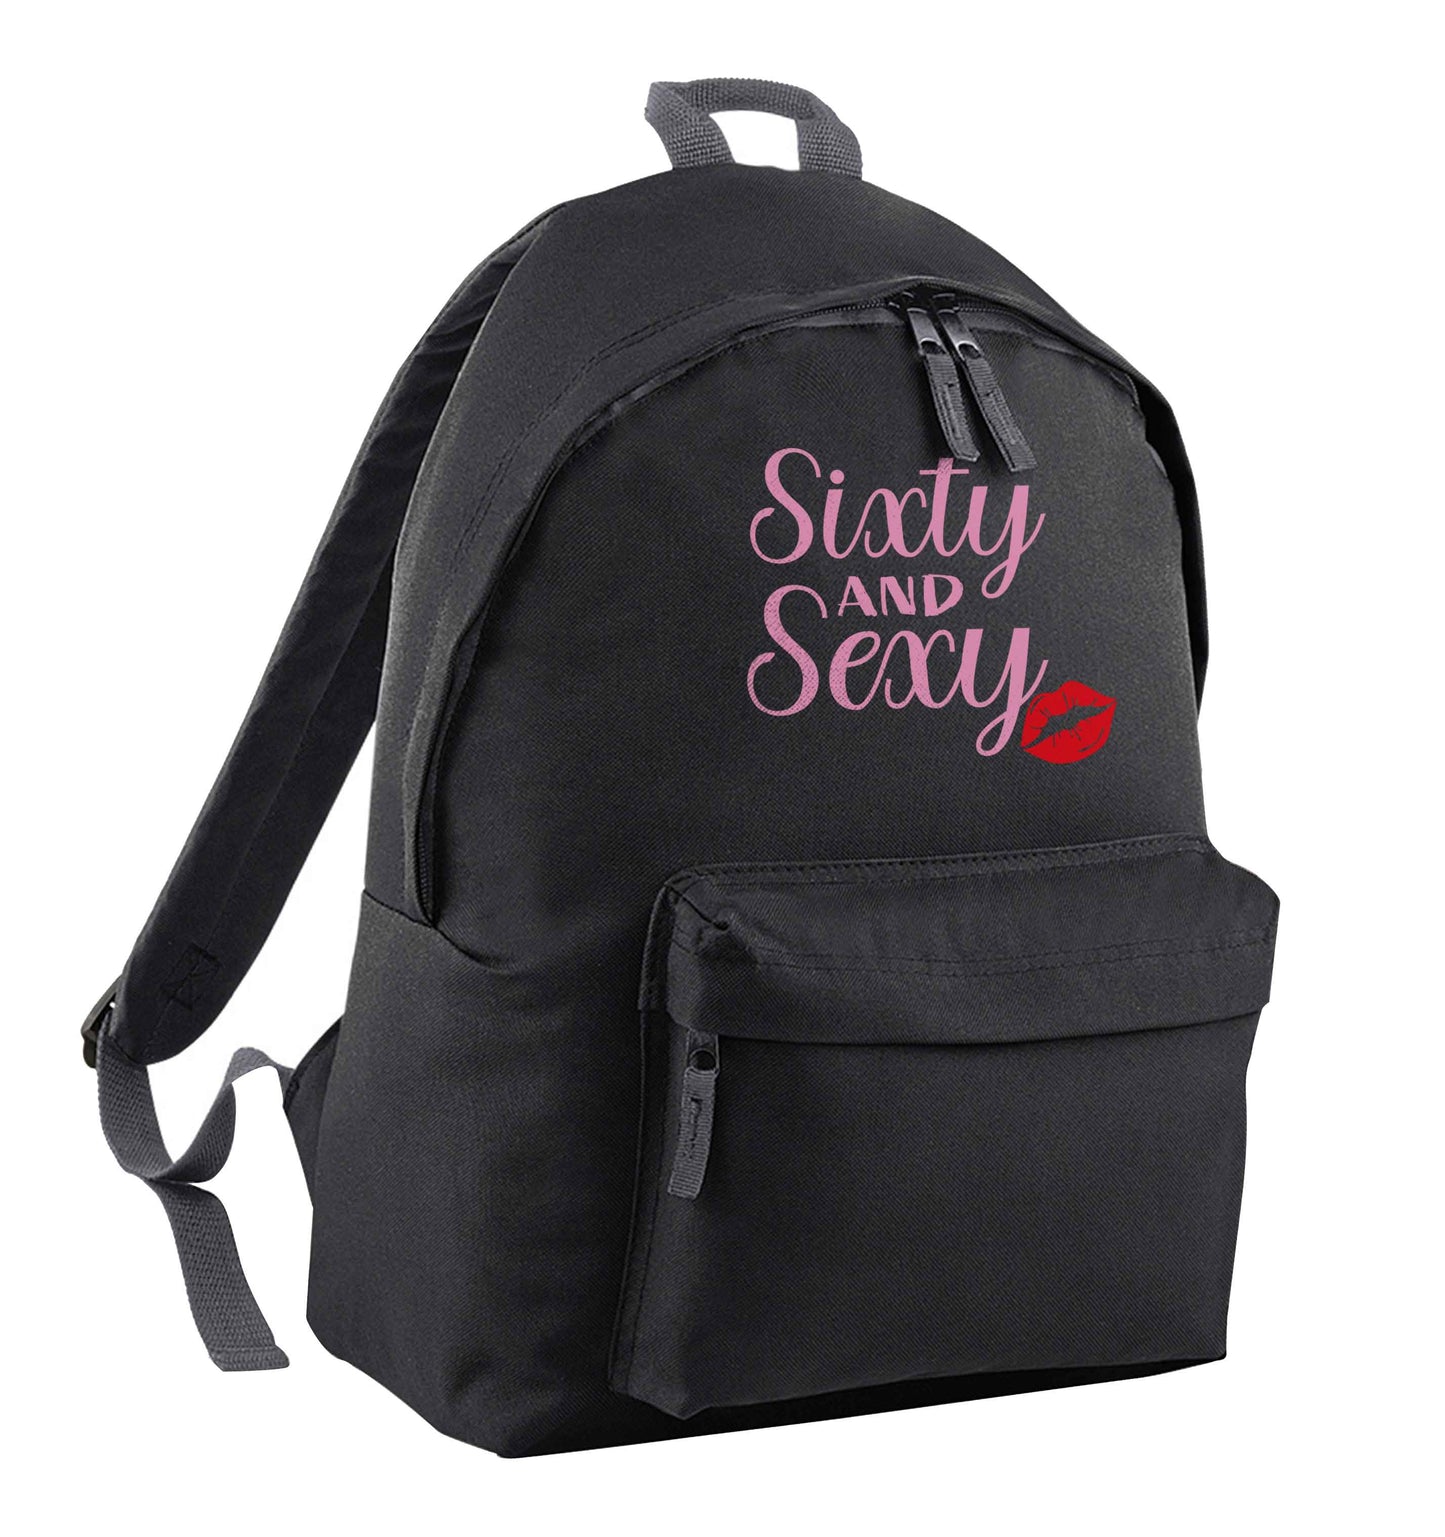 Sixty and sexy black adults backpack